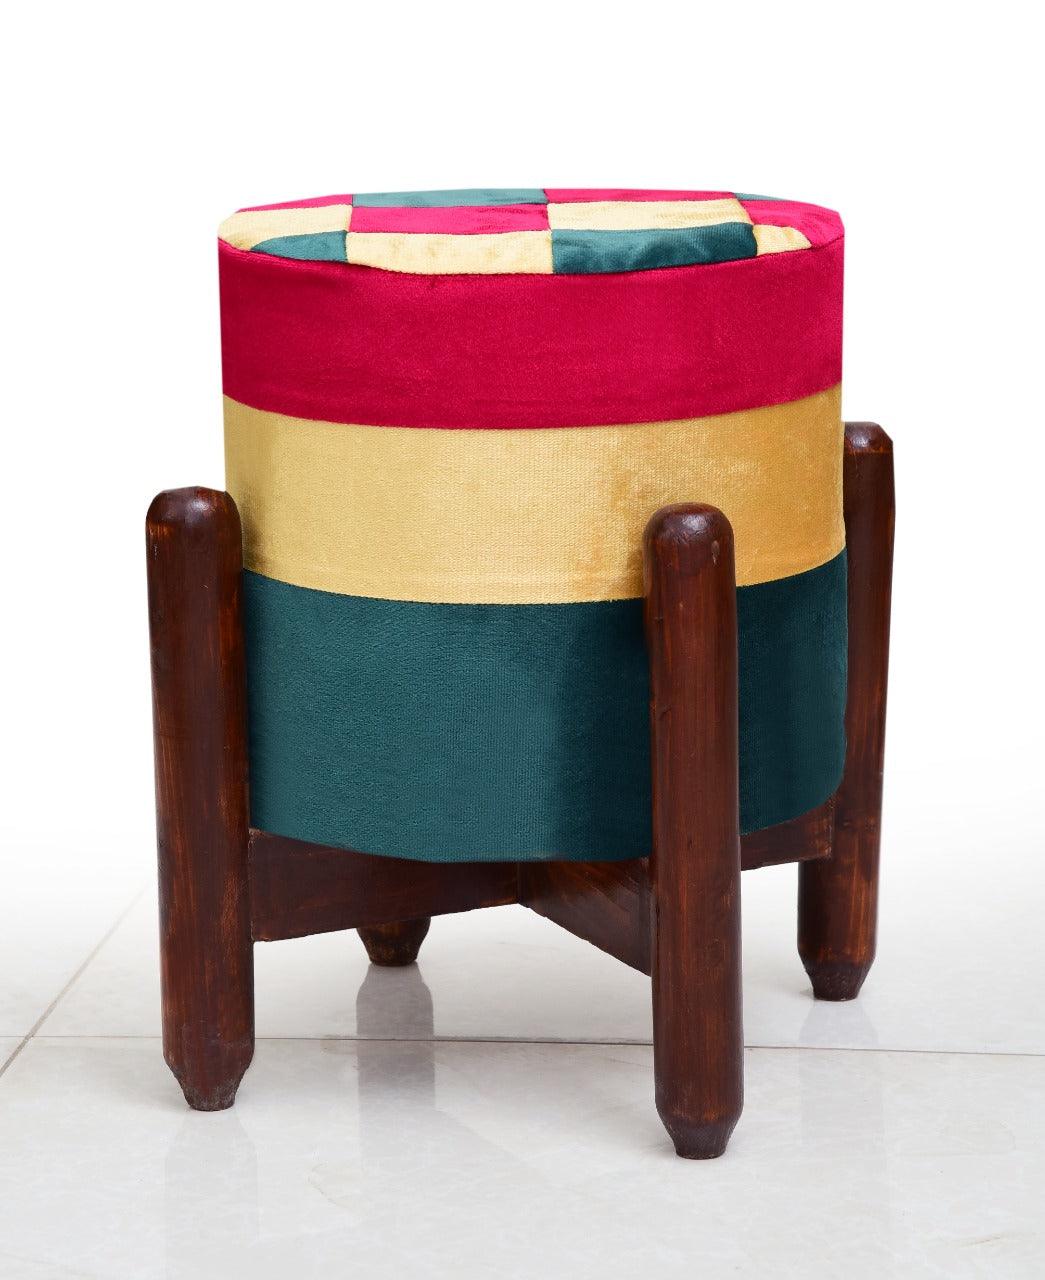 Drone Shape Round stool Printed -845 - 92Bedding